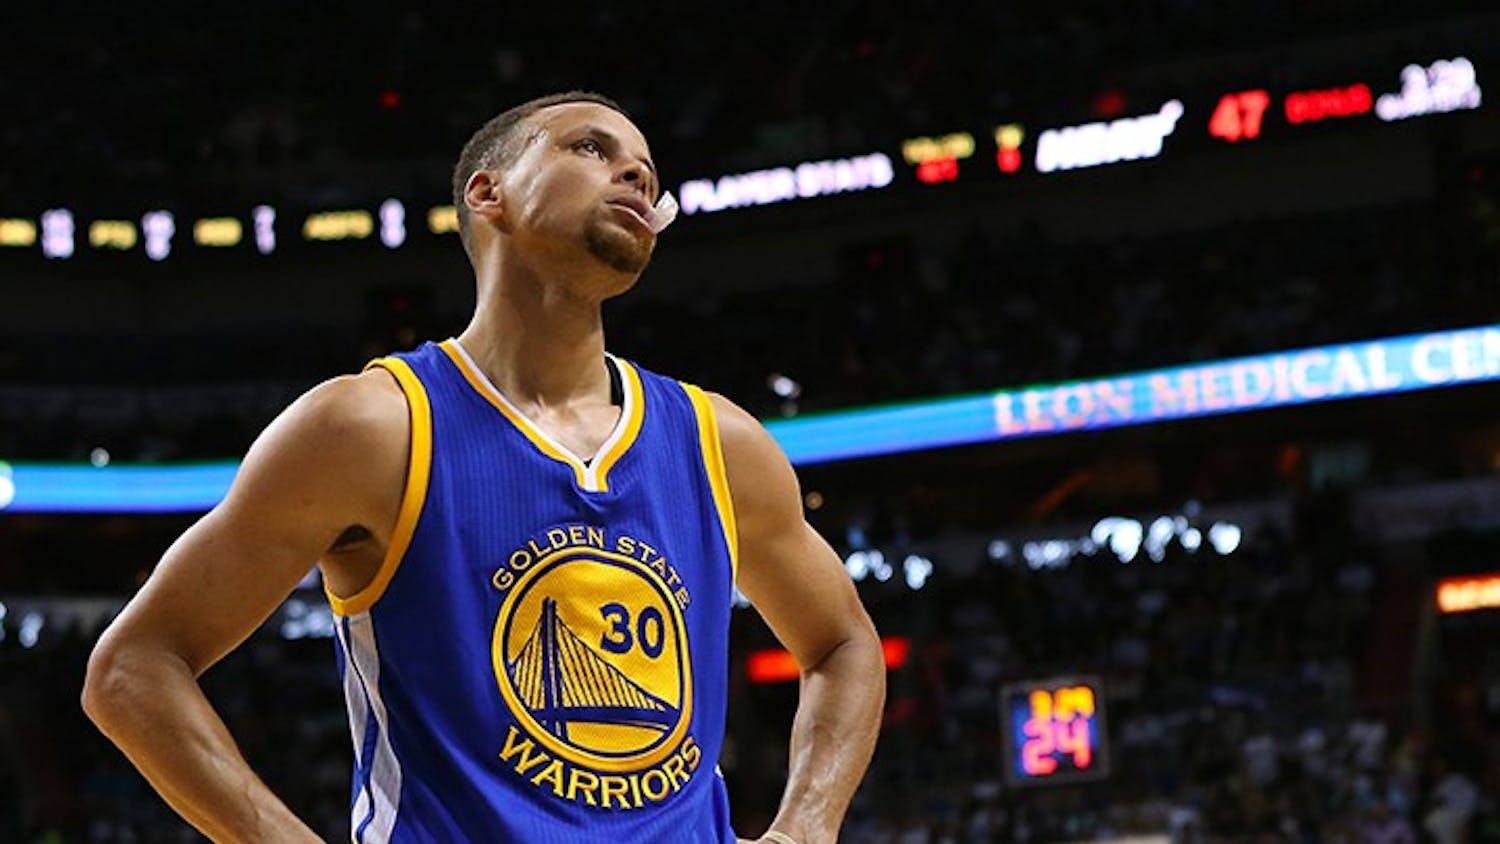 The Golden State Warriors&apos; Stephen Curry reacts after a play against the Miami Heat during the second quarter at the AmericanAirlines Arena in Miami on Wednesday, Feb. 24, 2016. The Warriors won, 118-112. (David Santiago/Miami Herald/TNS)